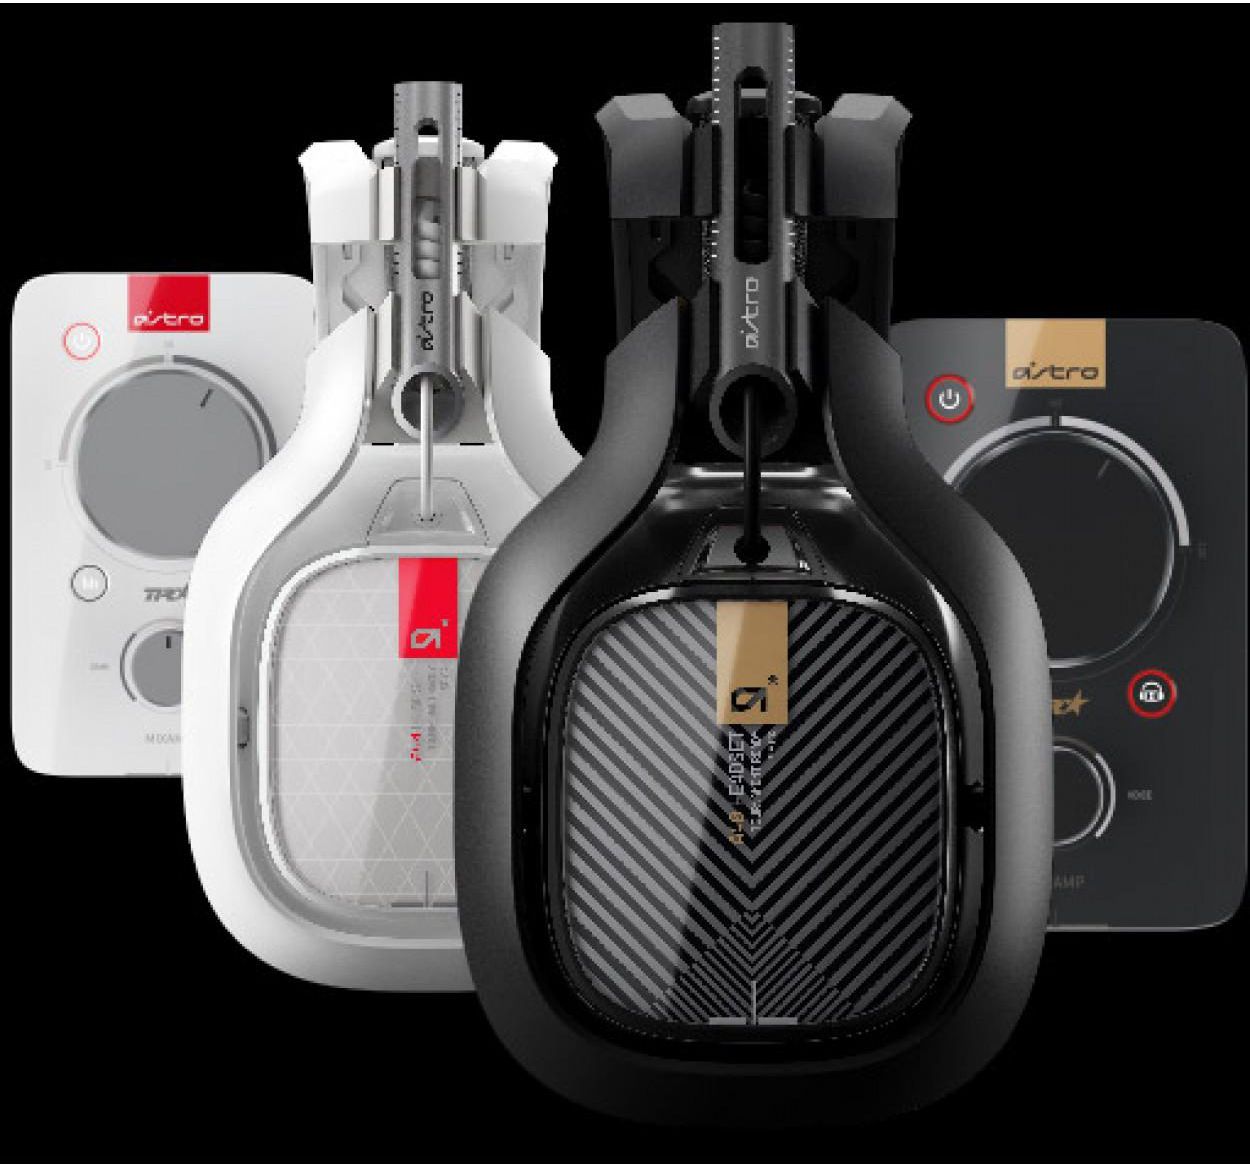 Astro Gaming 0 Tr Headset Mixamp Pro Tr Black Ps4 Ps3 Pc Price From Egy New Tech In Egypt Yaoota